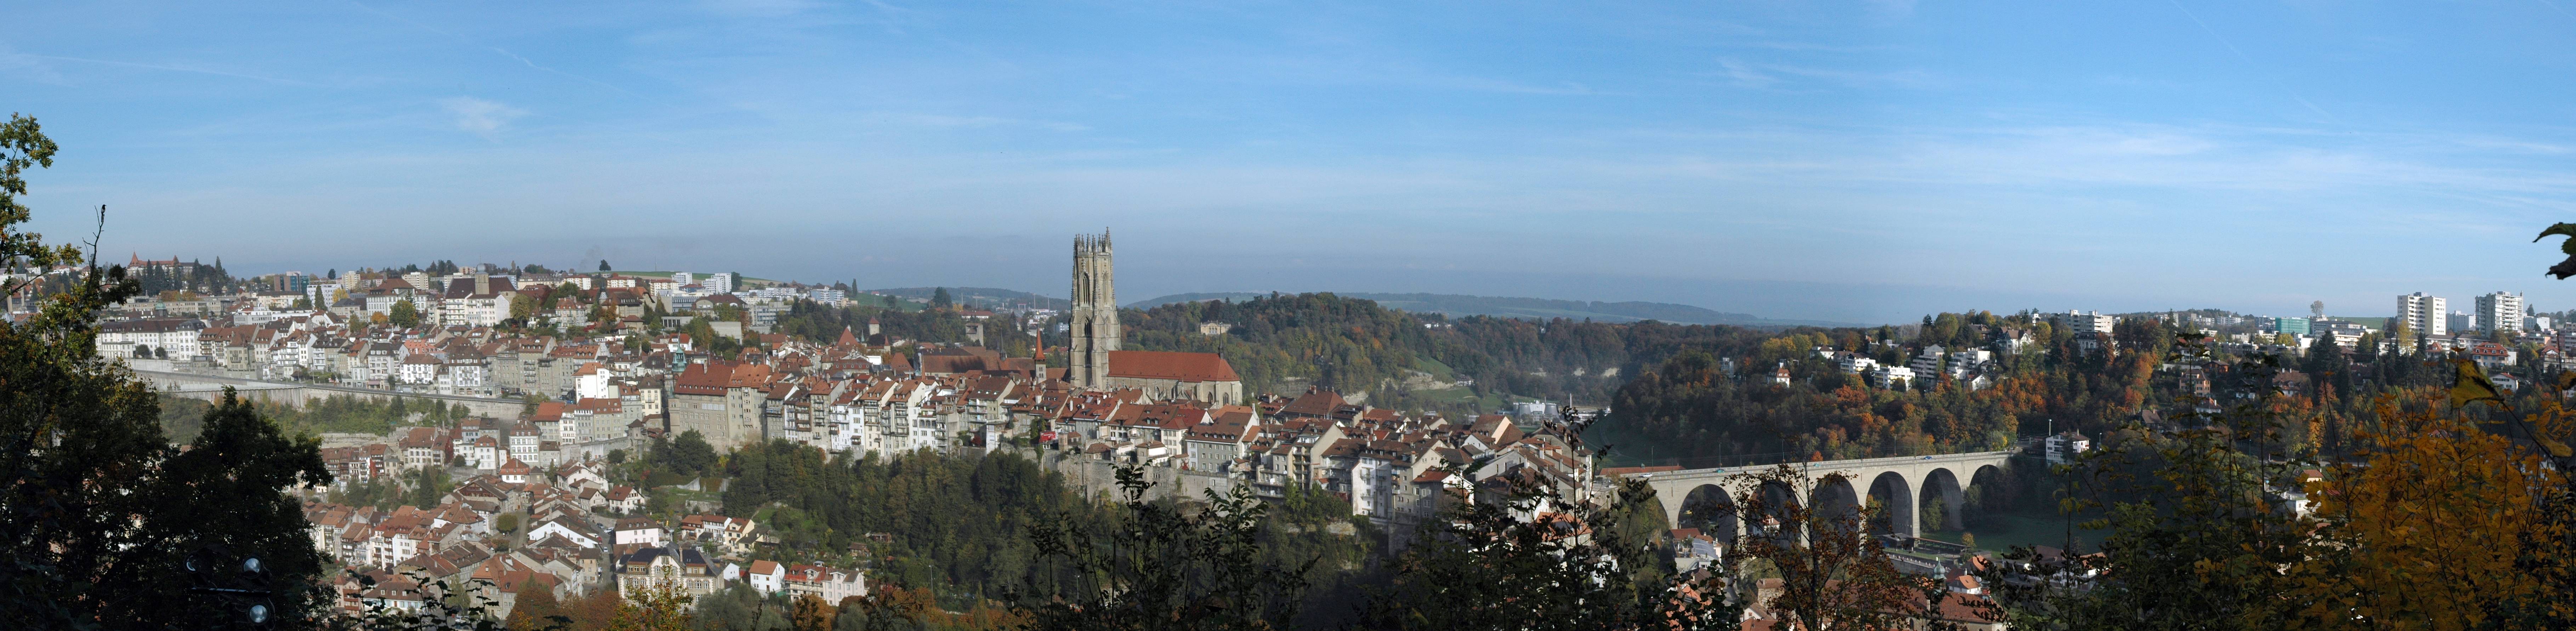 Pano Fribourg